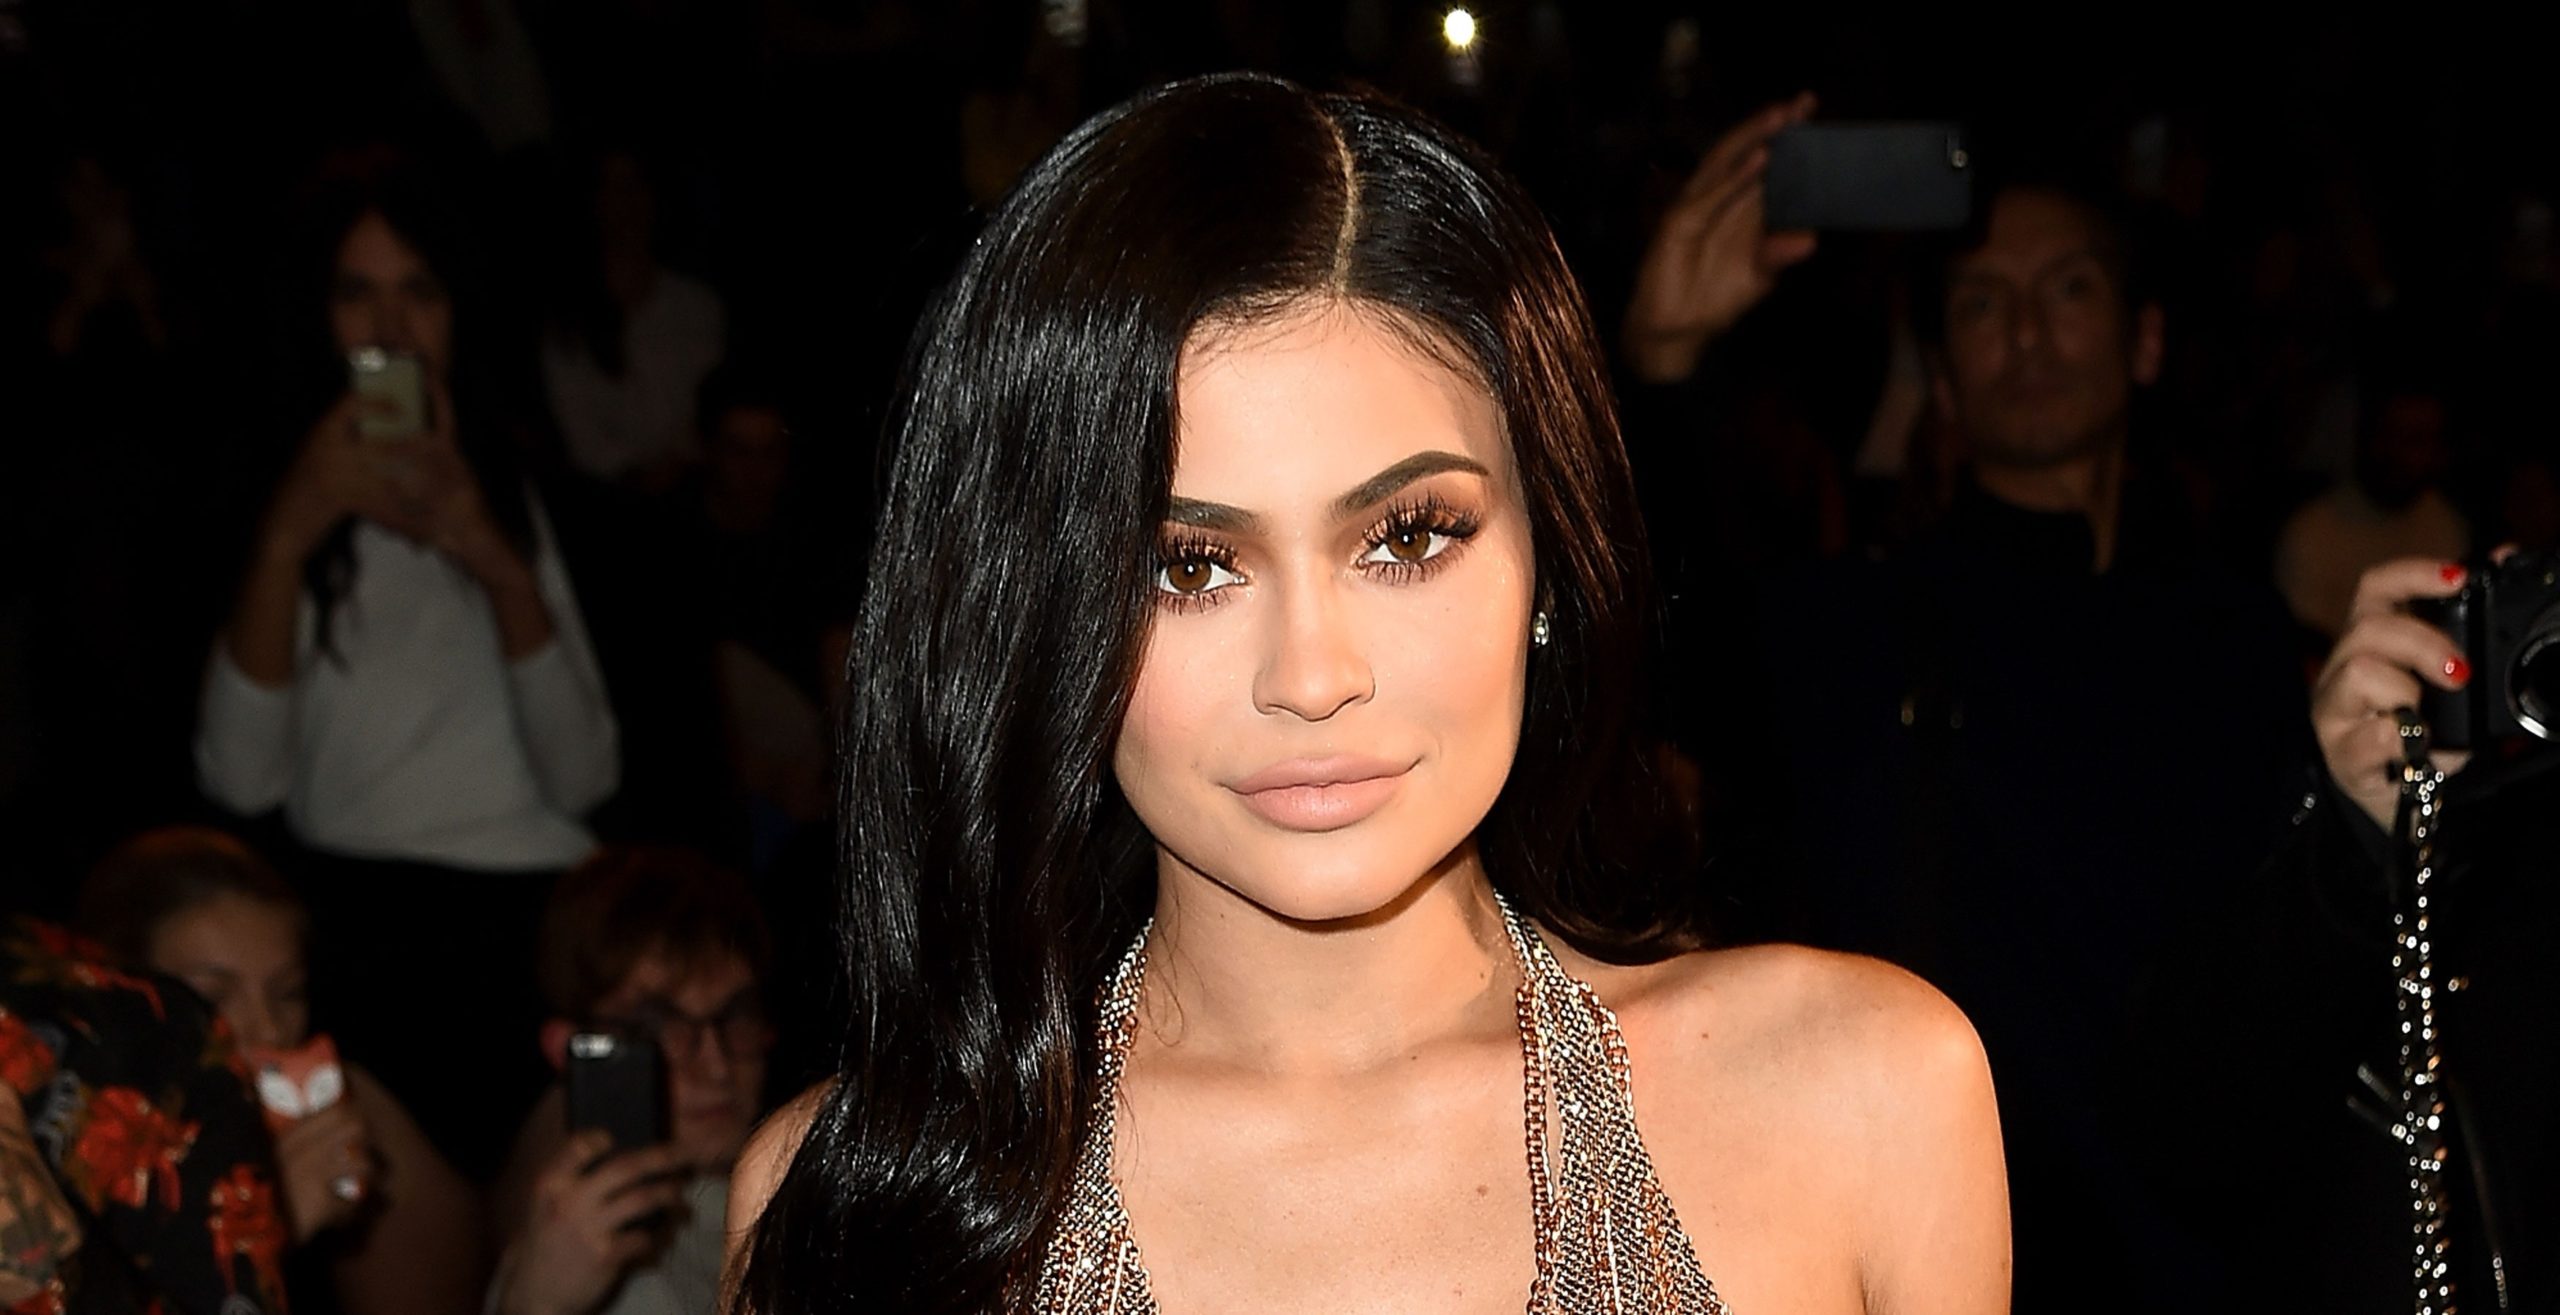 Kylie Jenner Celebrates Her Birthday Wearing a Bob Hairstyle — See the Photos